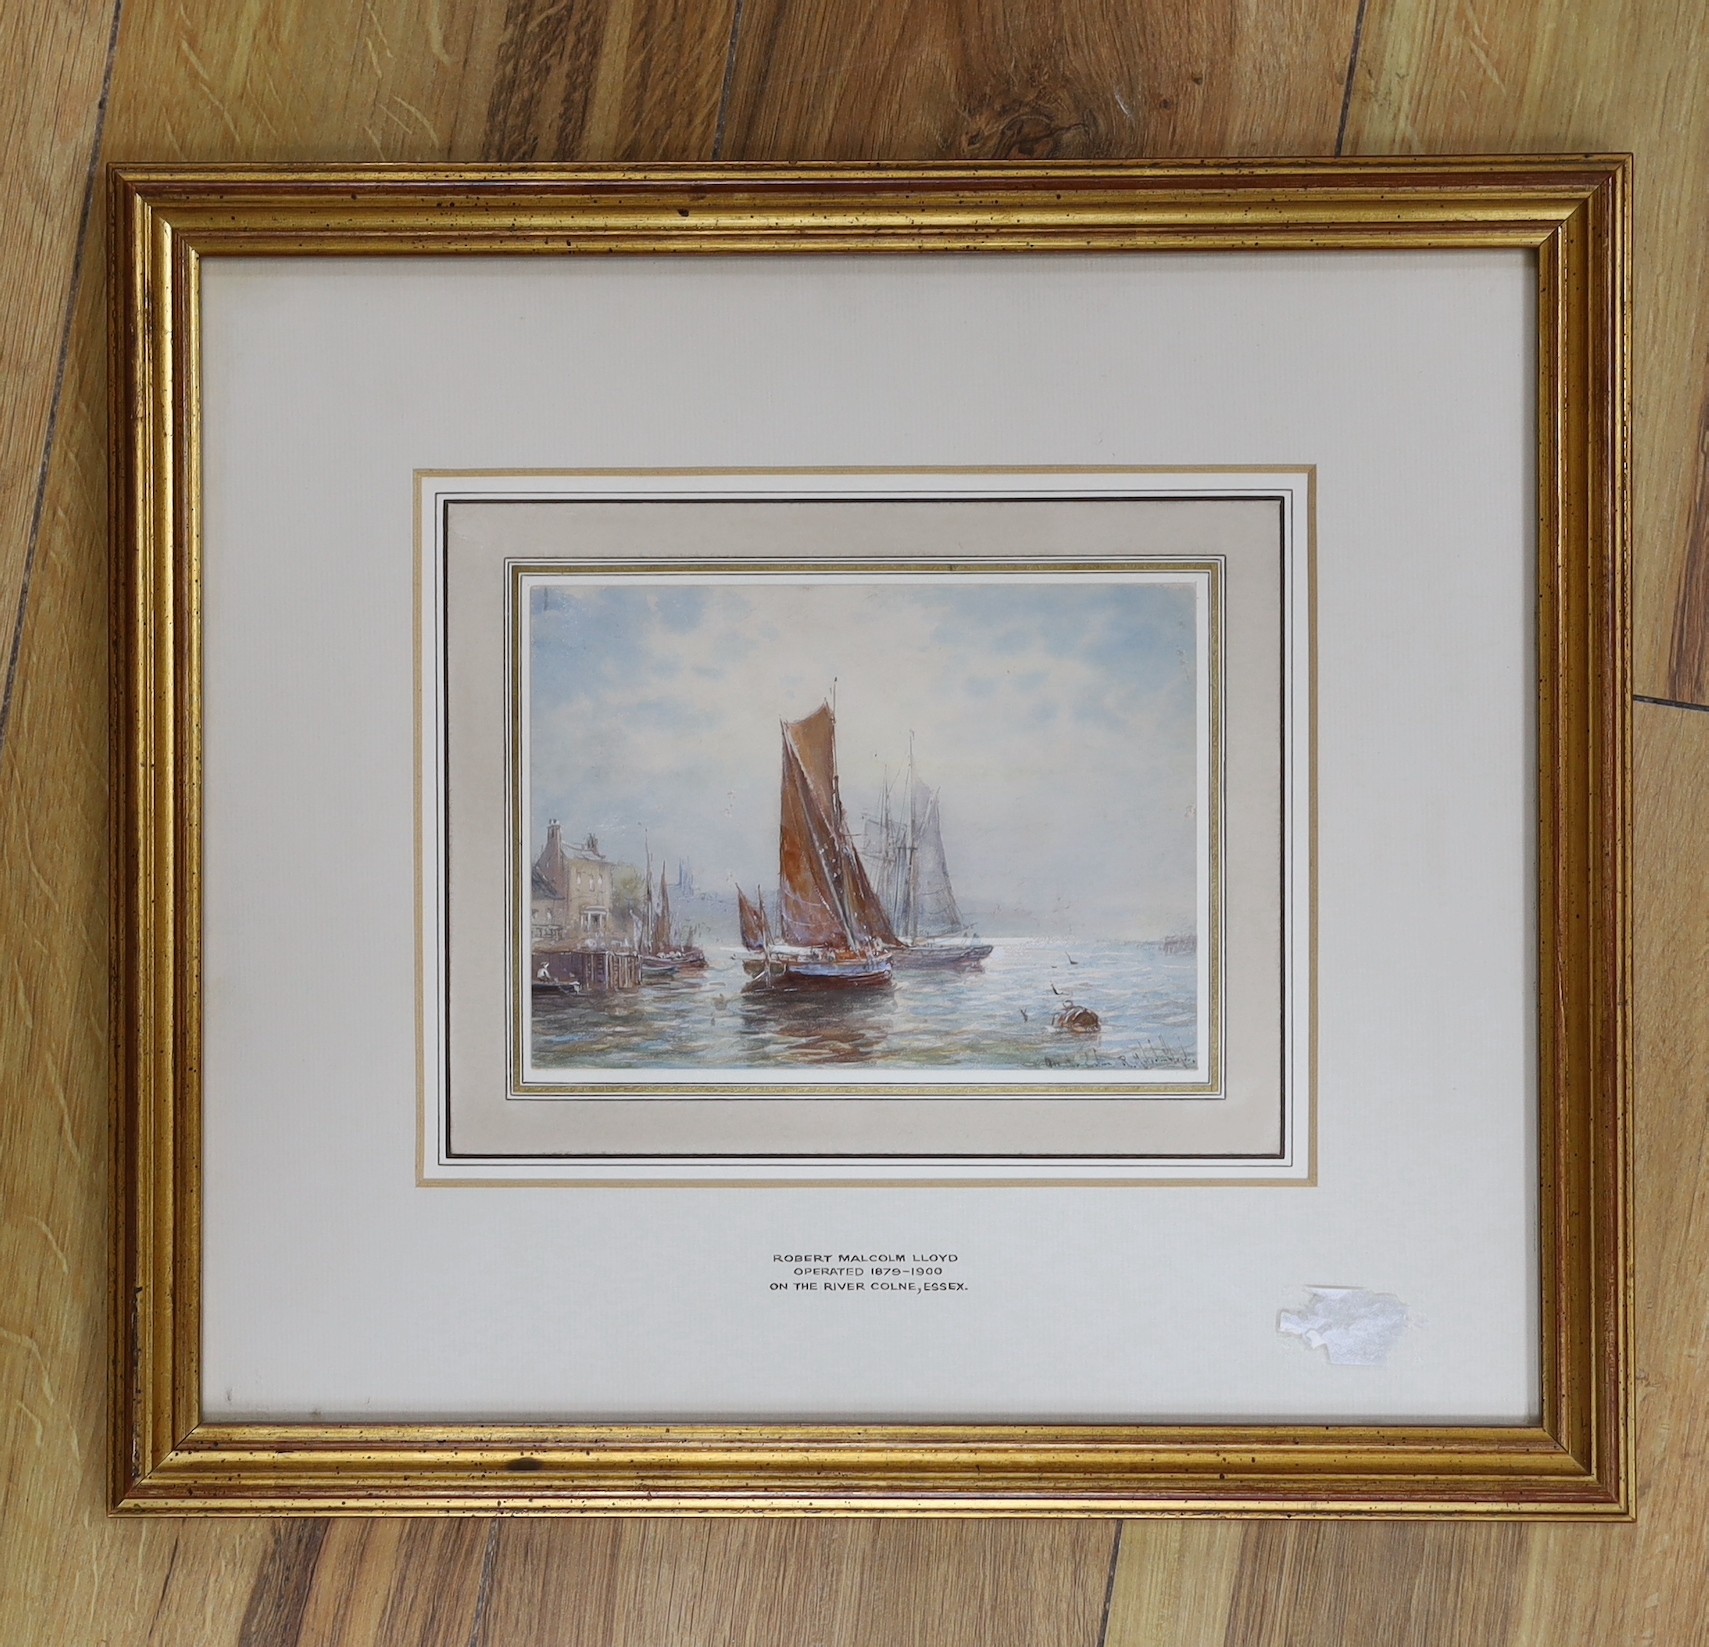 Robert Malcolm Lloyd (fl.1879-1900), watercolour, 'On the River Colne, Essex', signed, 12 x 17cm - Image 2 of 4